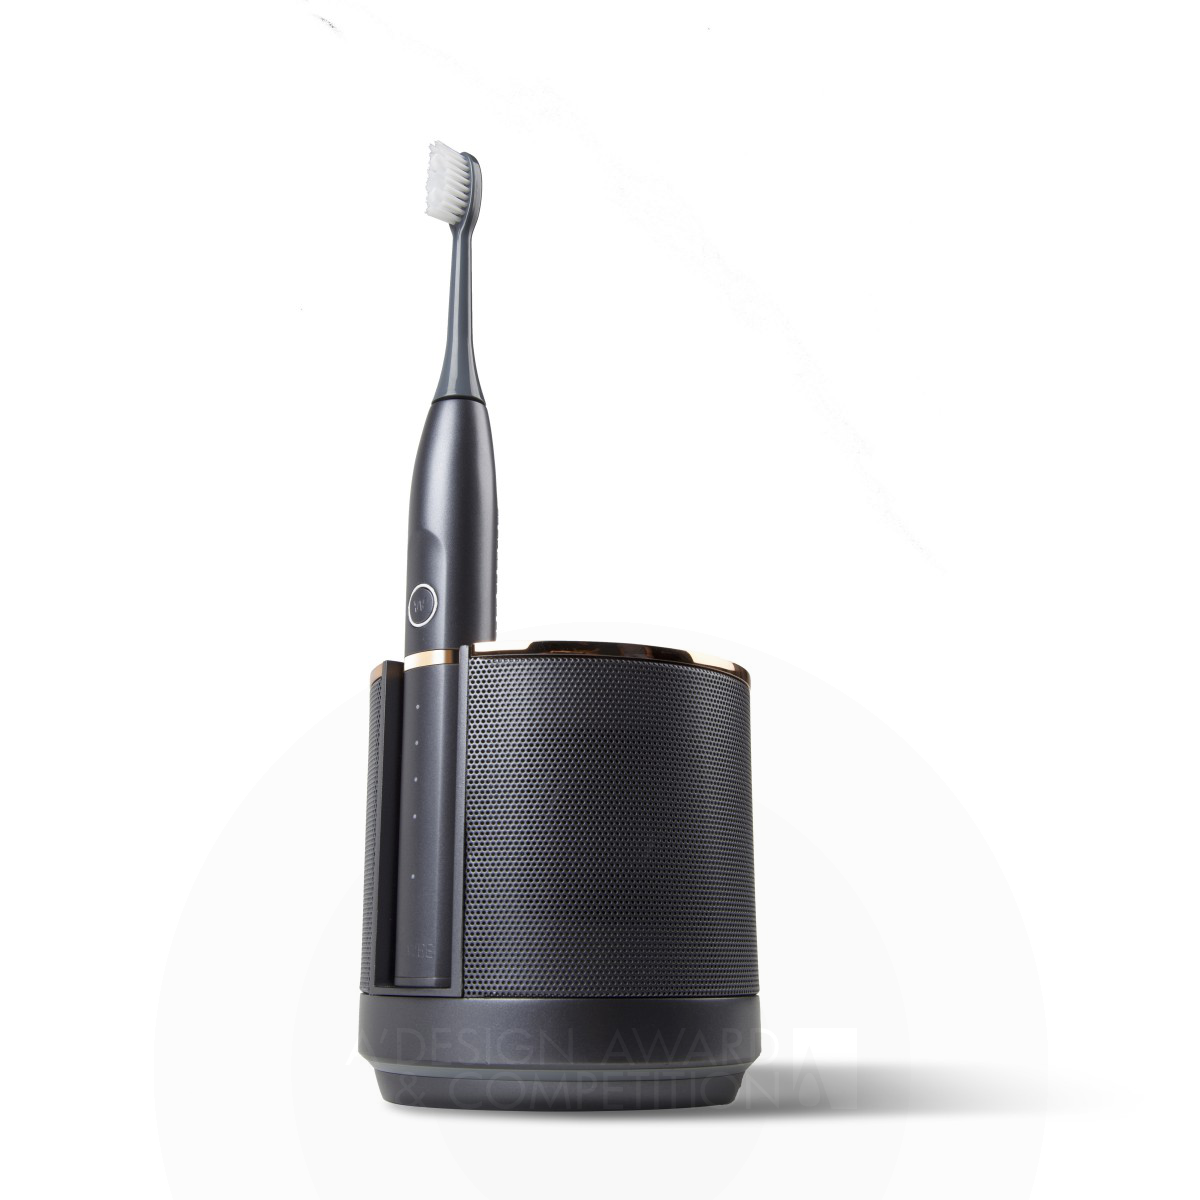 Wavee: A Multifunctional Toothbrush Revolutionizing Personal Care